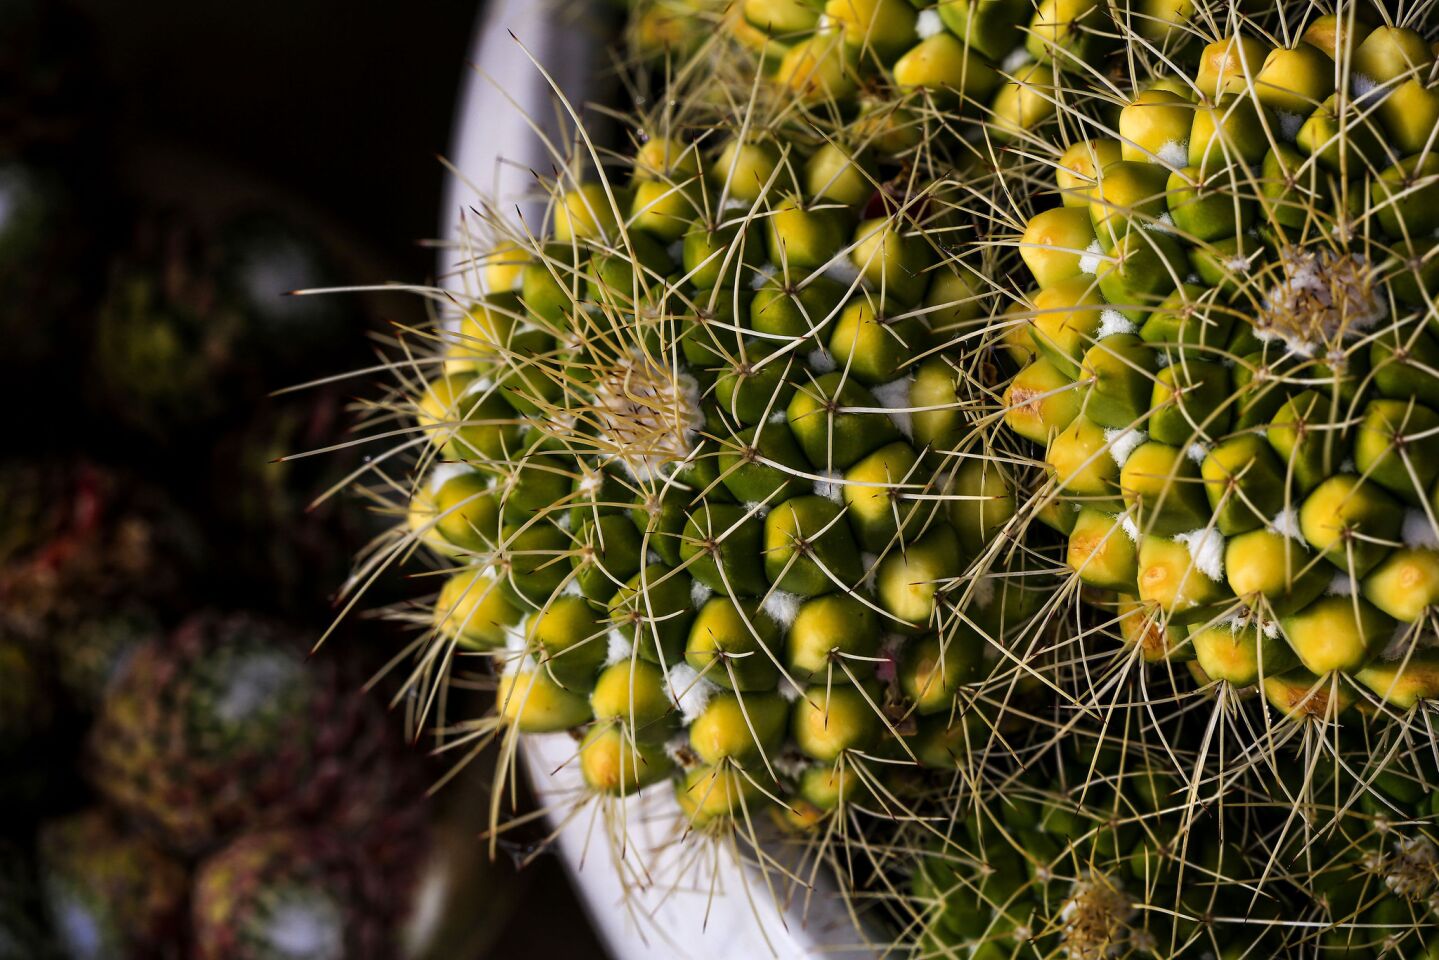 Kurt Kamm describes Mammillaria compressa as "one nasty cactus." The big ones look like trouble, with all those thorns, he said, "but the little ones that look soft and fuzzy are the real killers."